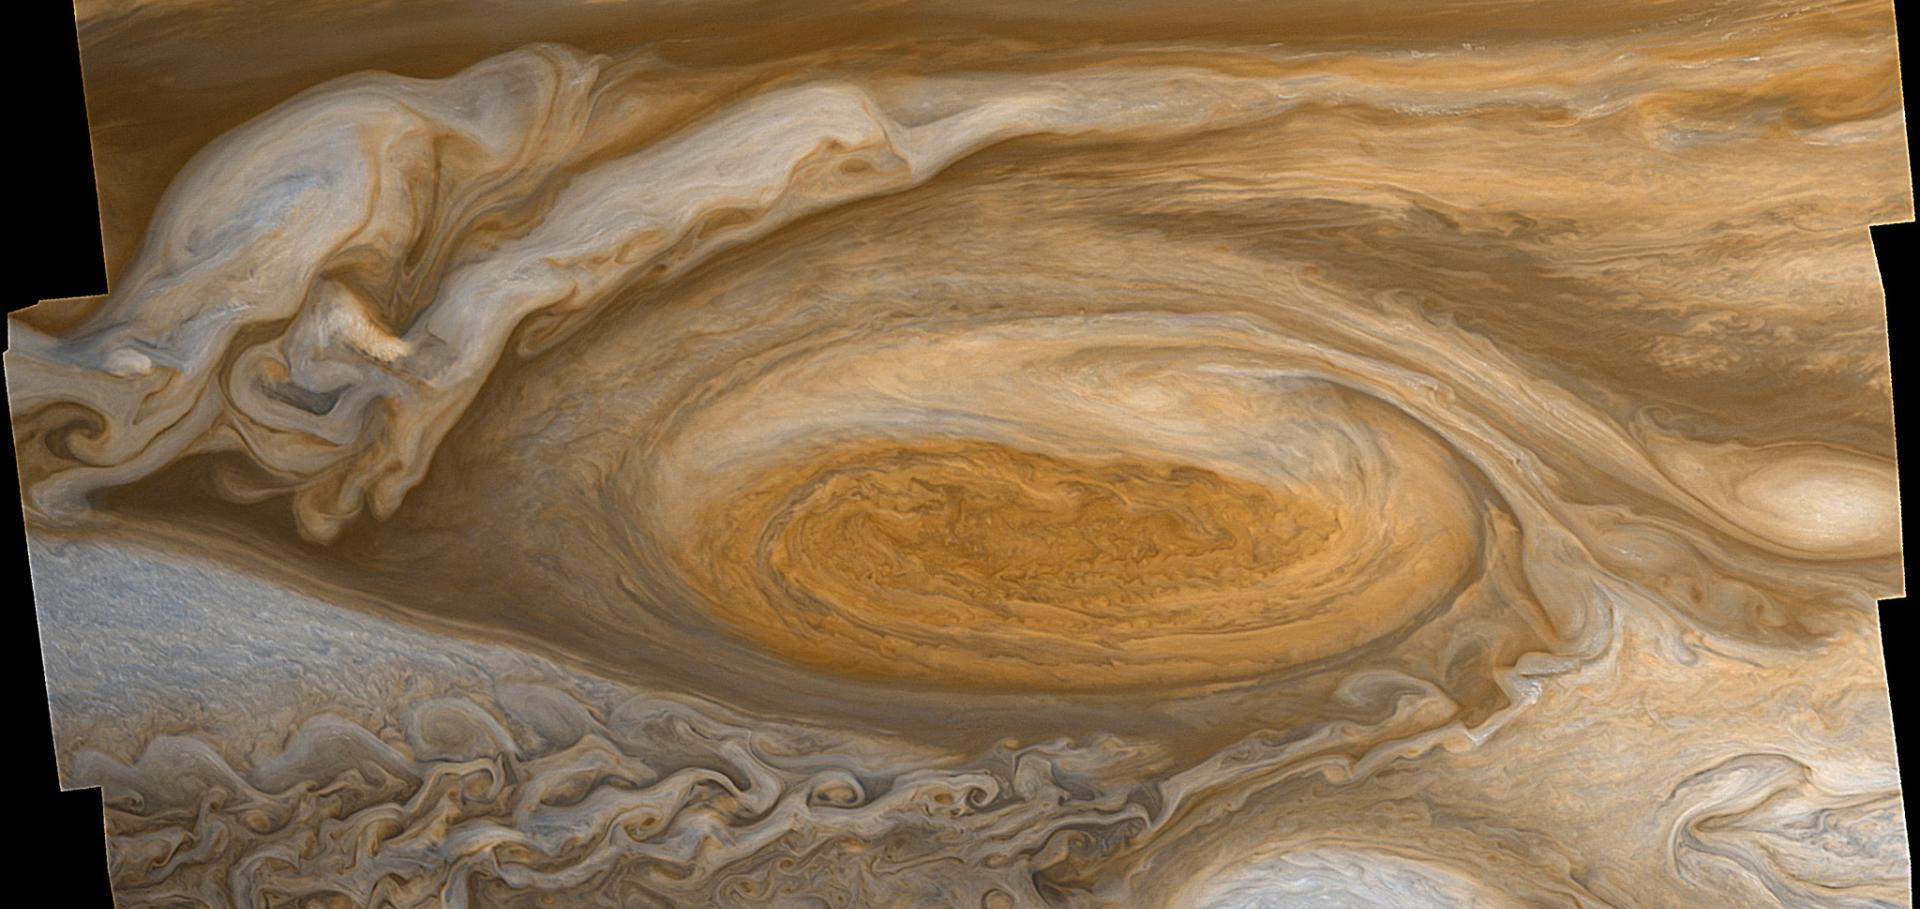 Image of Jupiter's Great Red Spot from Voyager 1